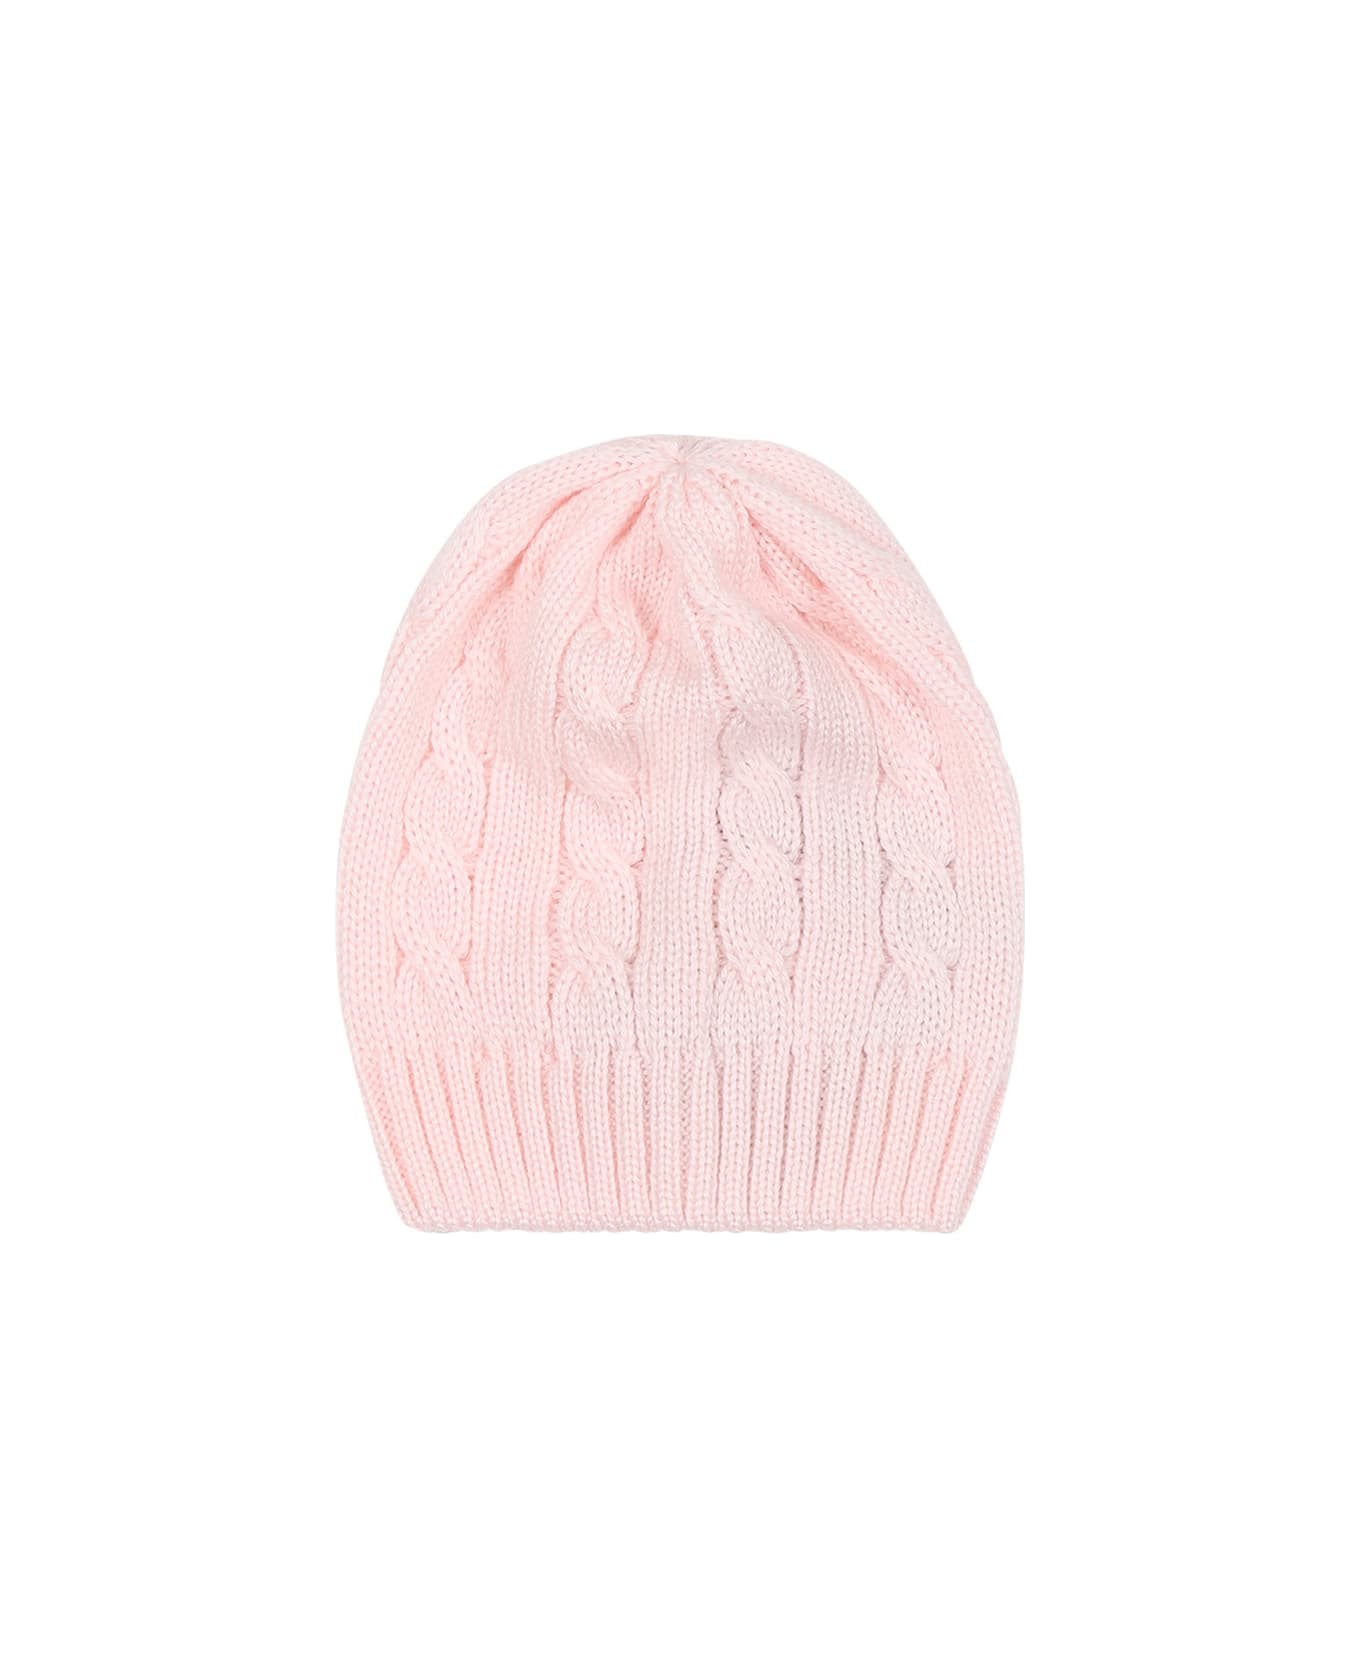 Little Bear Pink Hat For Baby Girl - Cipria アクセサリー＆ギフト